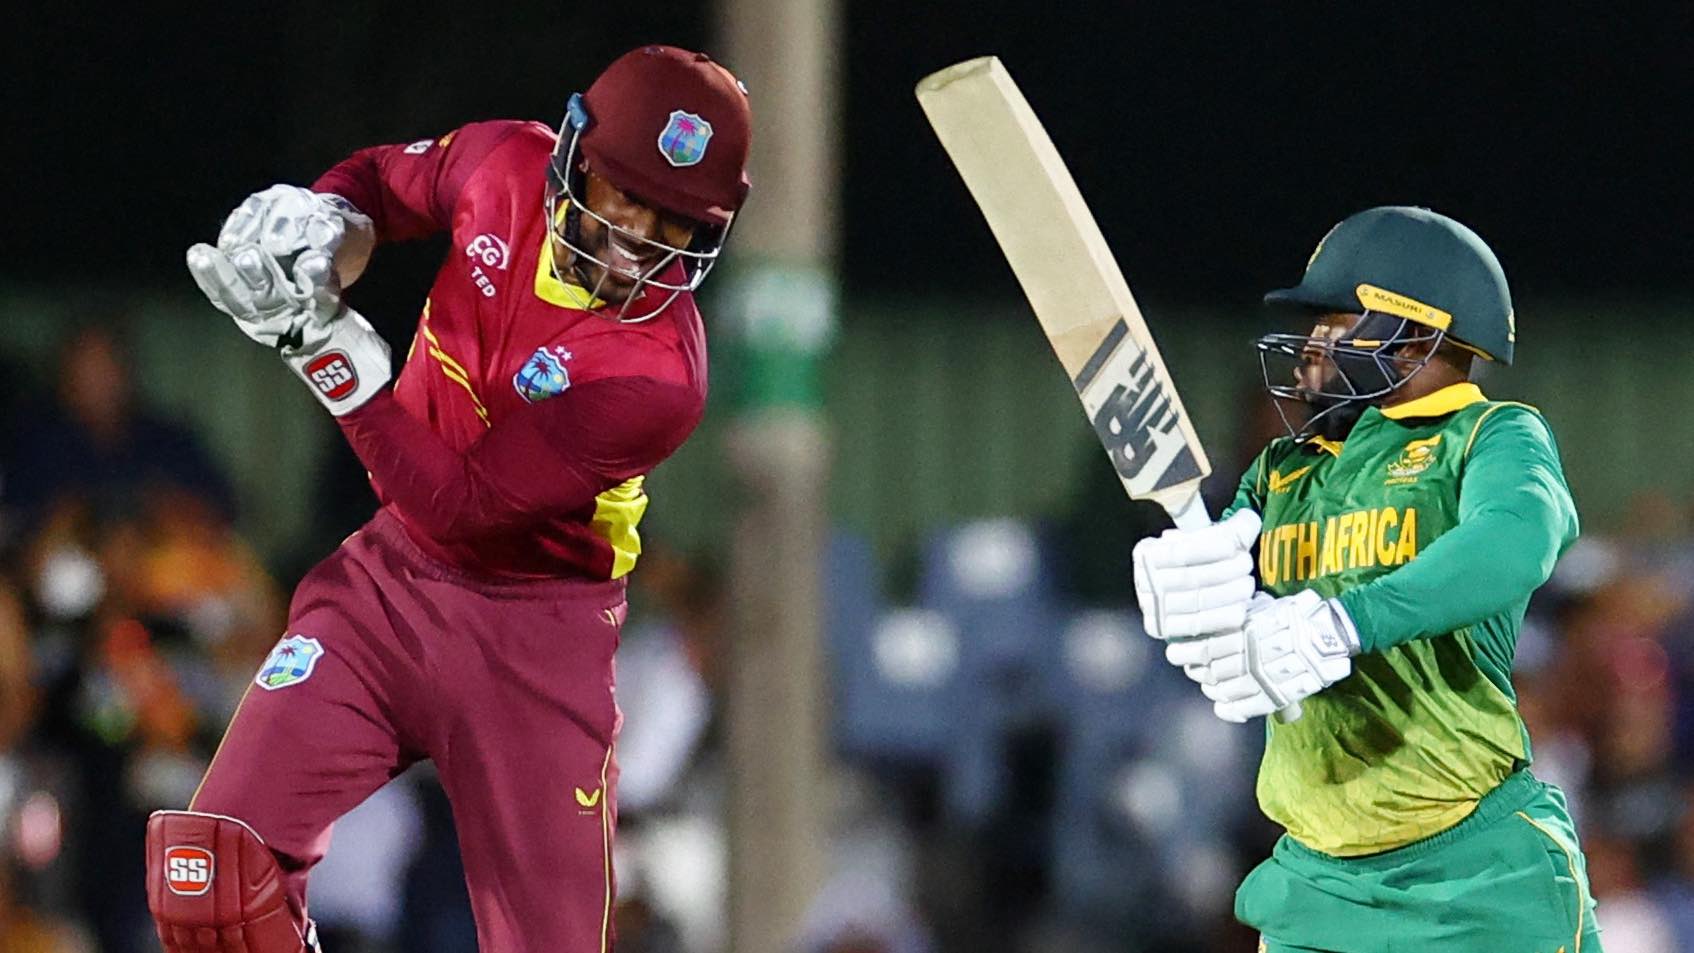 South Africa vs West Indies, 3rd ODI LIVE Streaming, When and Where to